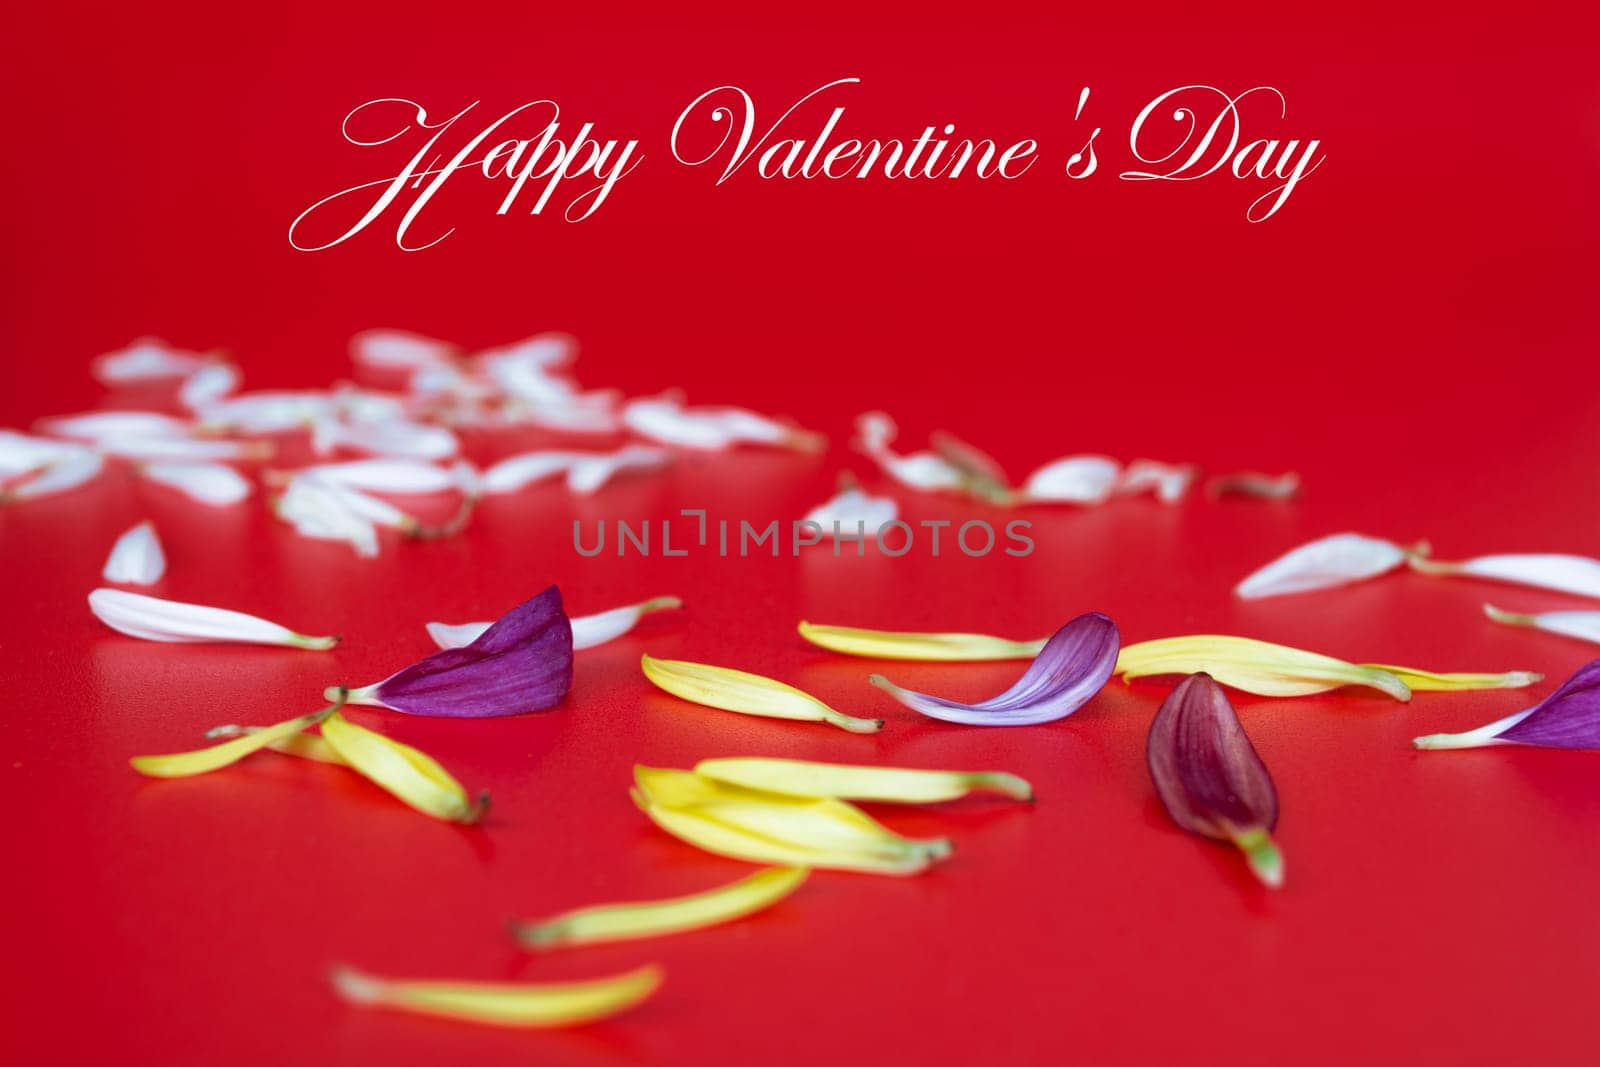 Valentine's Day Greeting with flower petals on red background. Wishes and greeting.